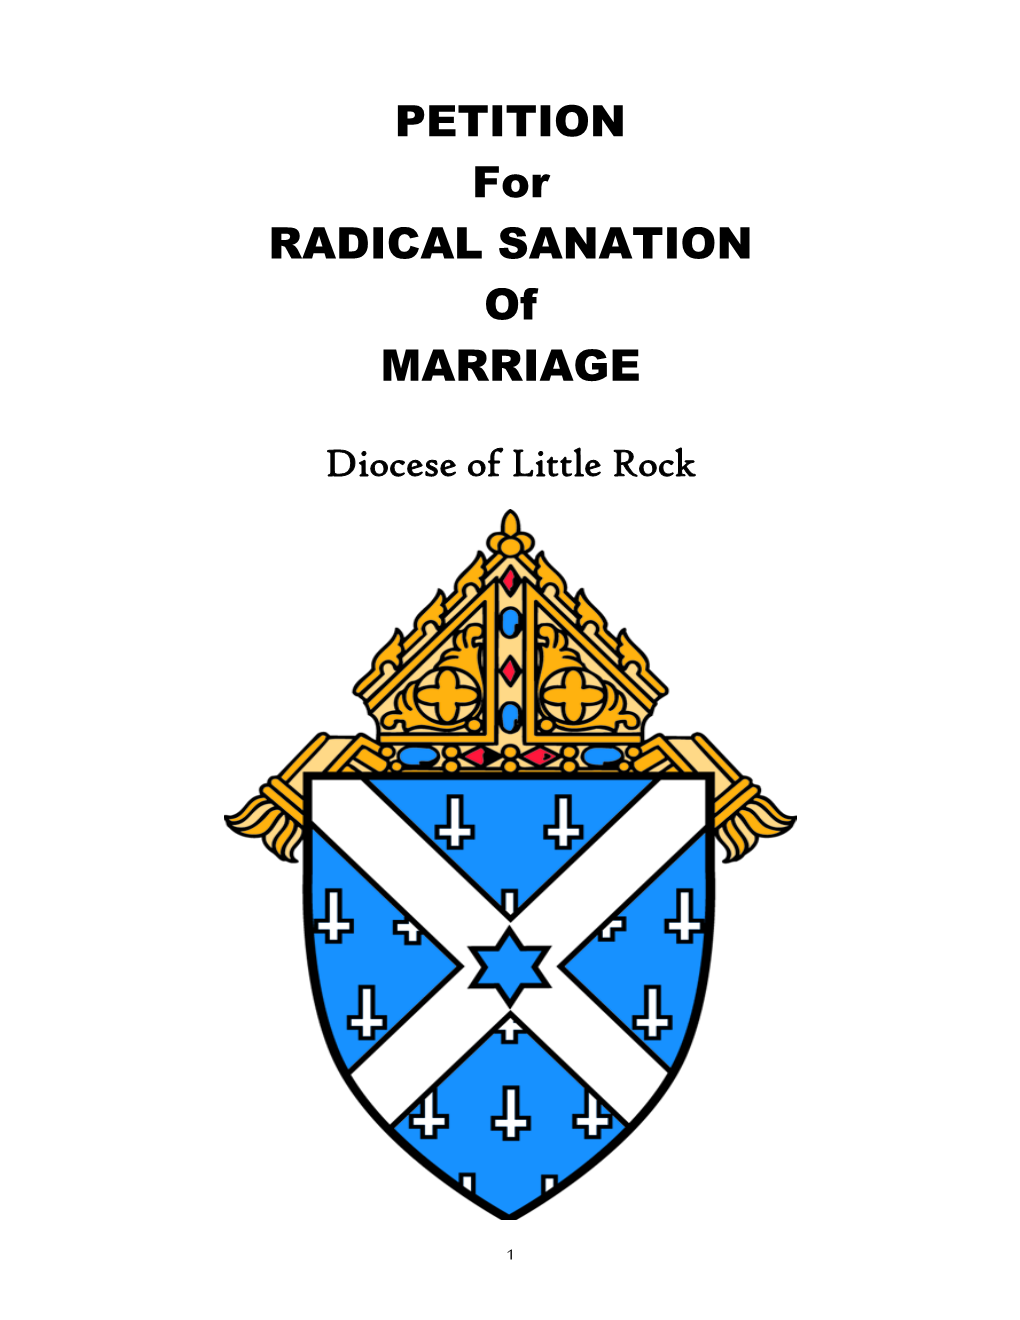 PETITION for RADICAL SANATION of MARRIAGE